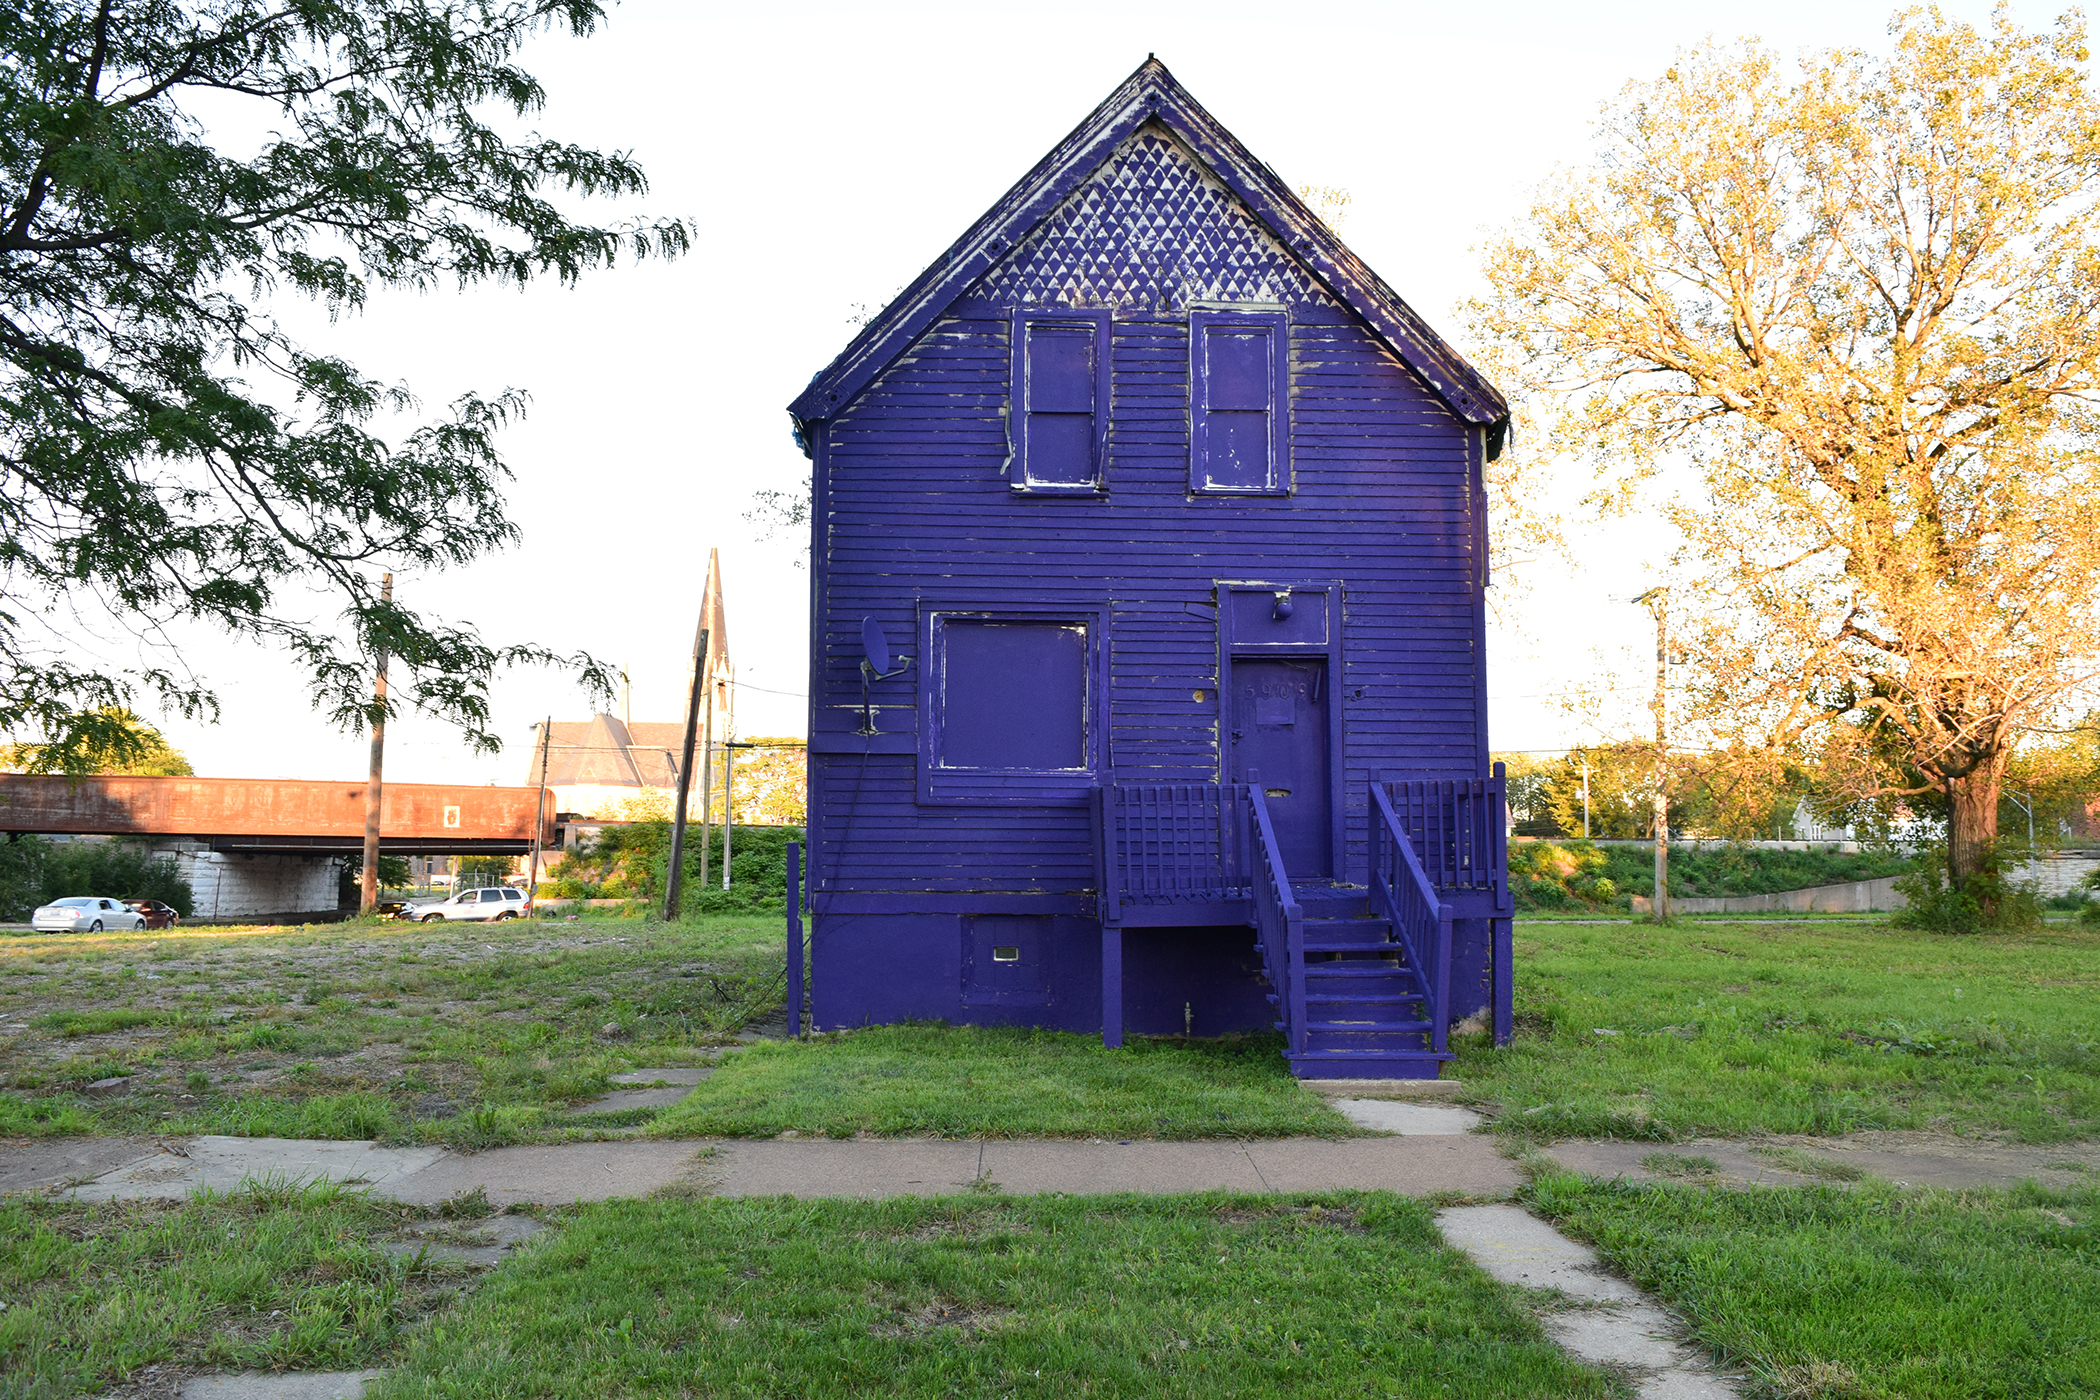 worker housing with gabled roof painted purple sitting in an isolated field